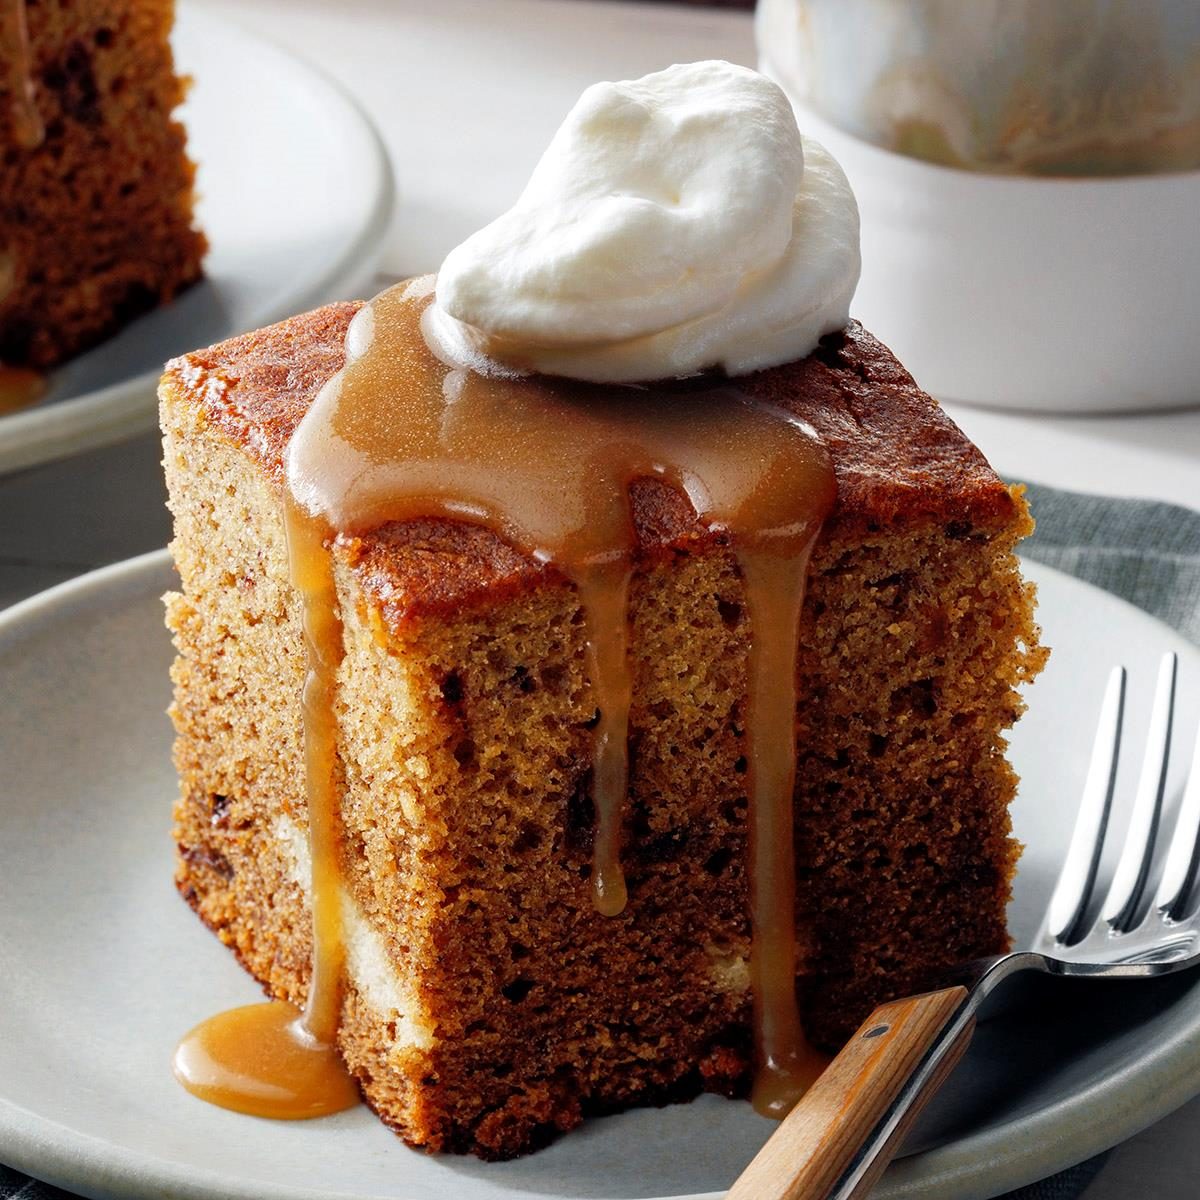 Sticky Toffee Pudding With Butterscotch Sauce Exps Tohca23 162342 P1onp2 Md 10 04 11b